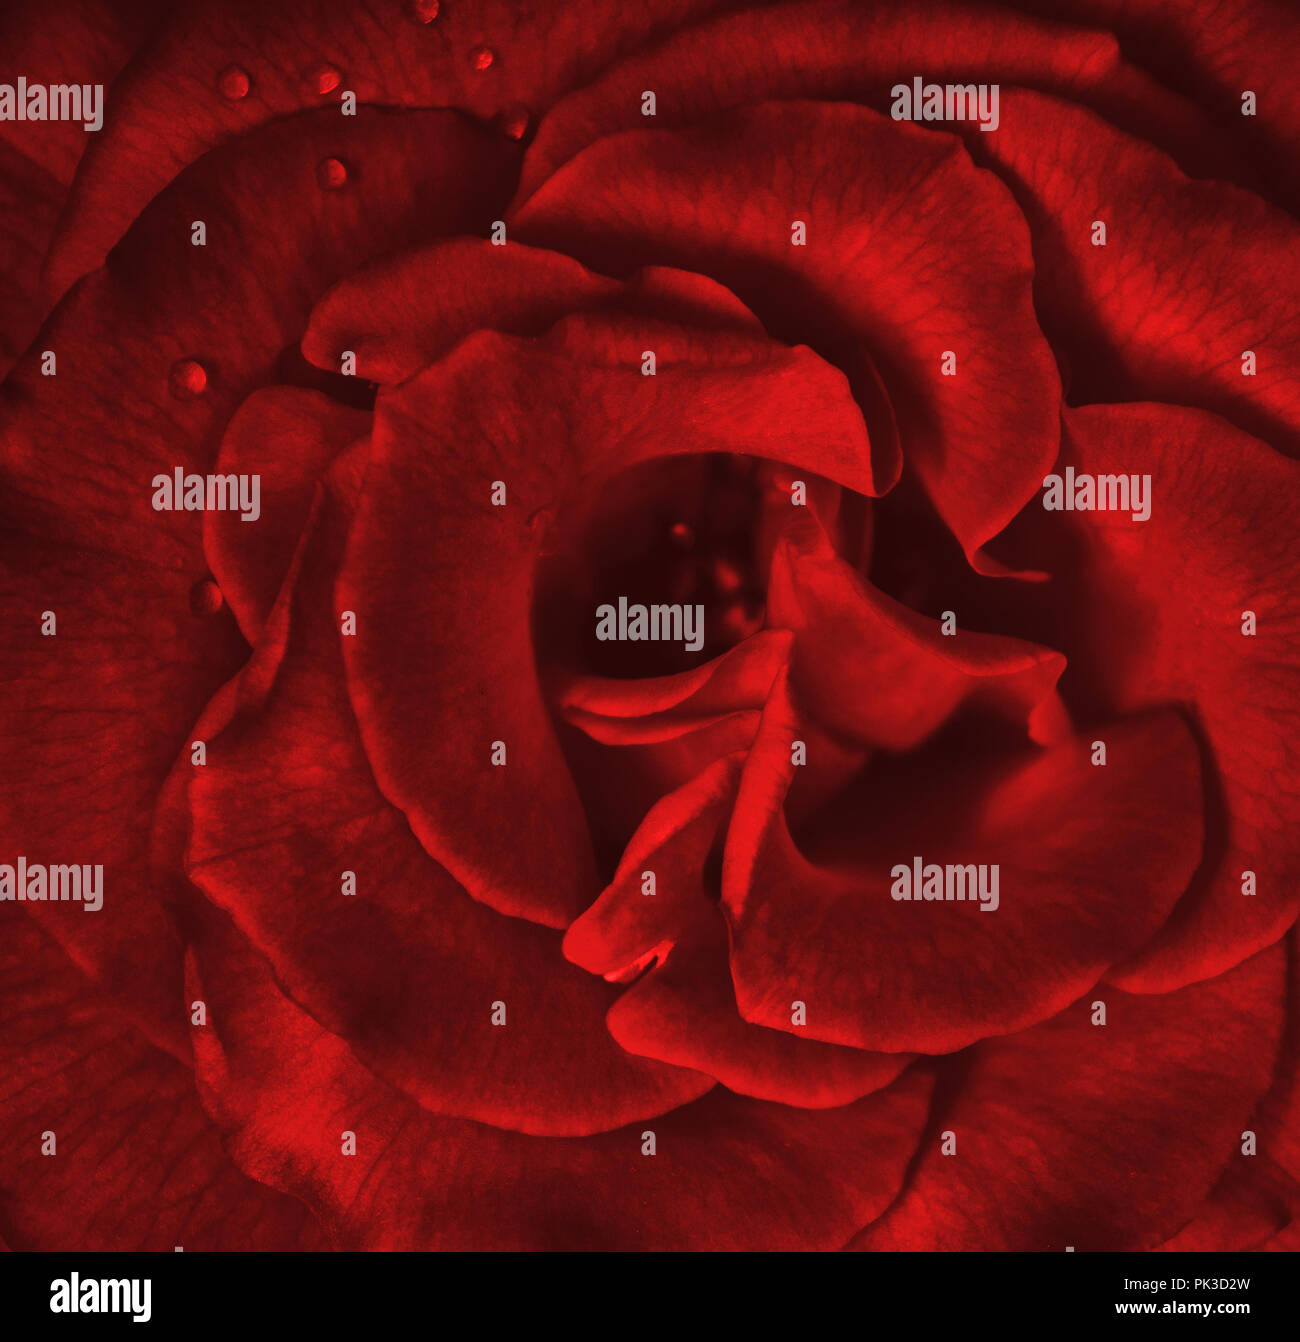 Red rose. Abstract red rose. Rose background. Love background. Passion background. Stock Photo